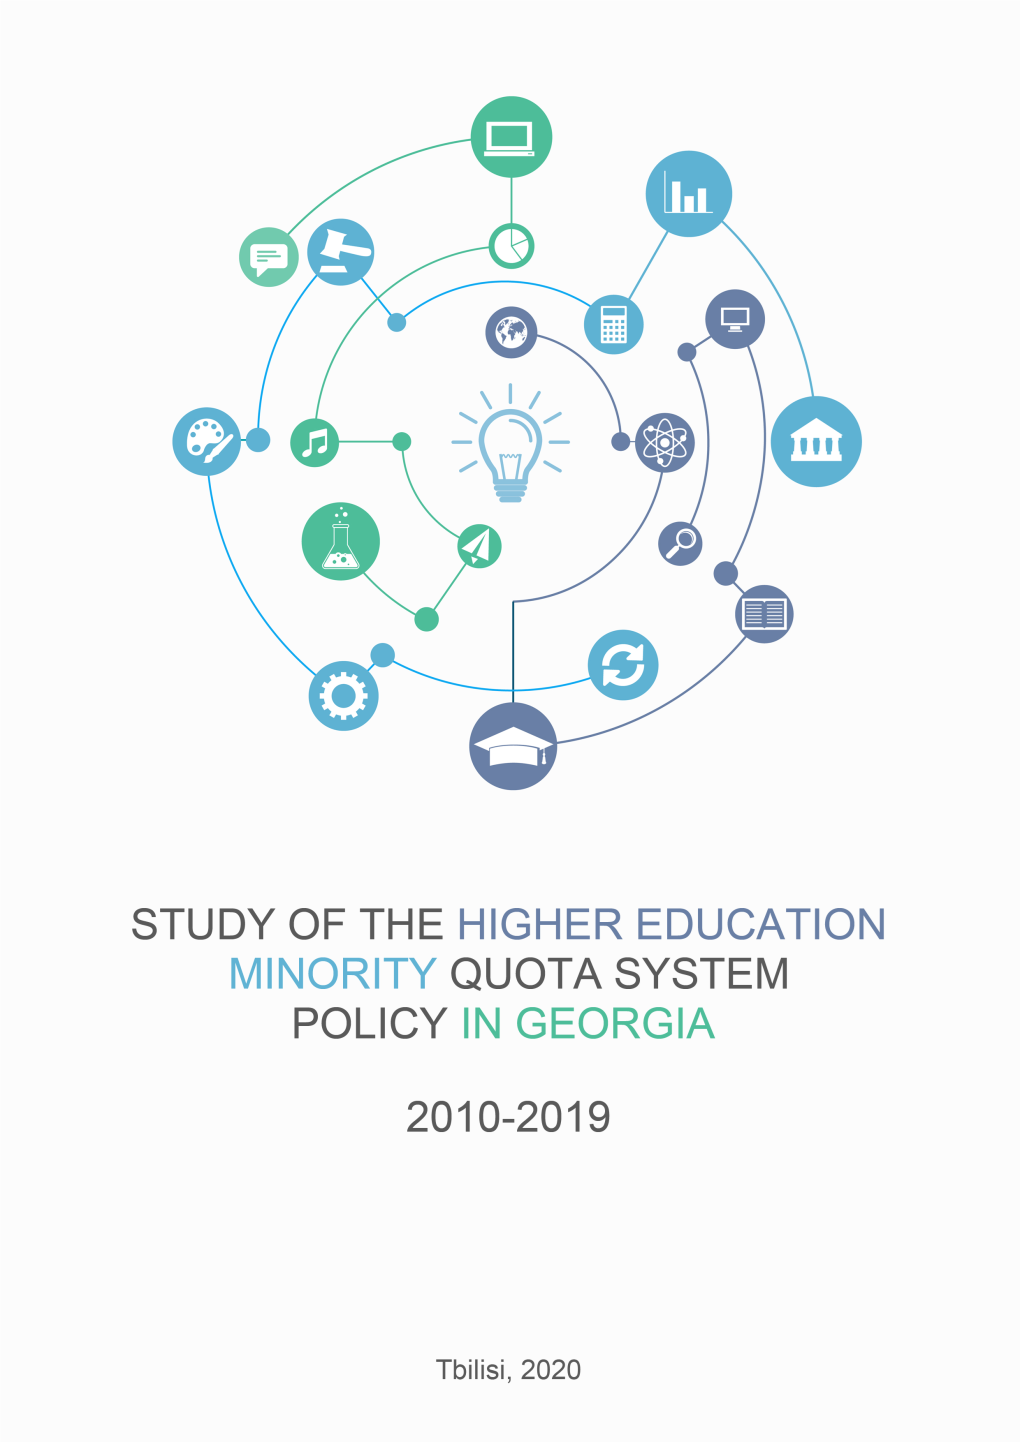 Study of the Higher Education Minority Quota System Policy in Georgia